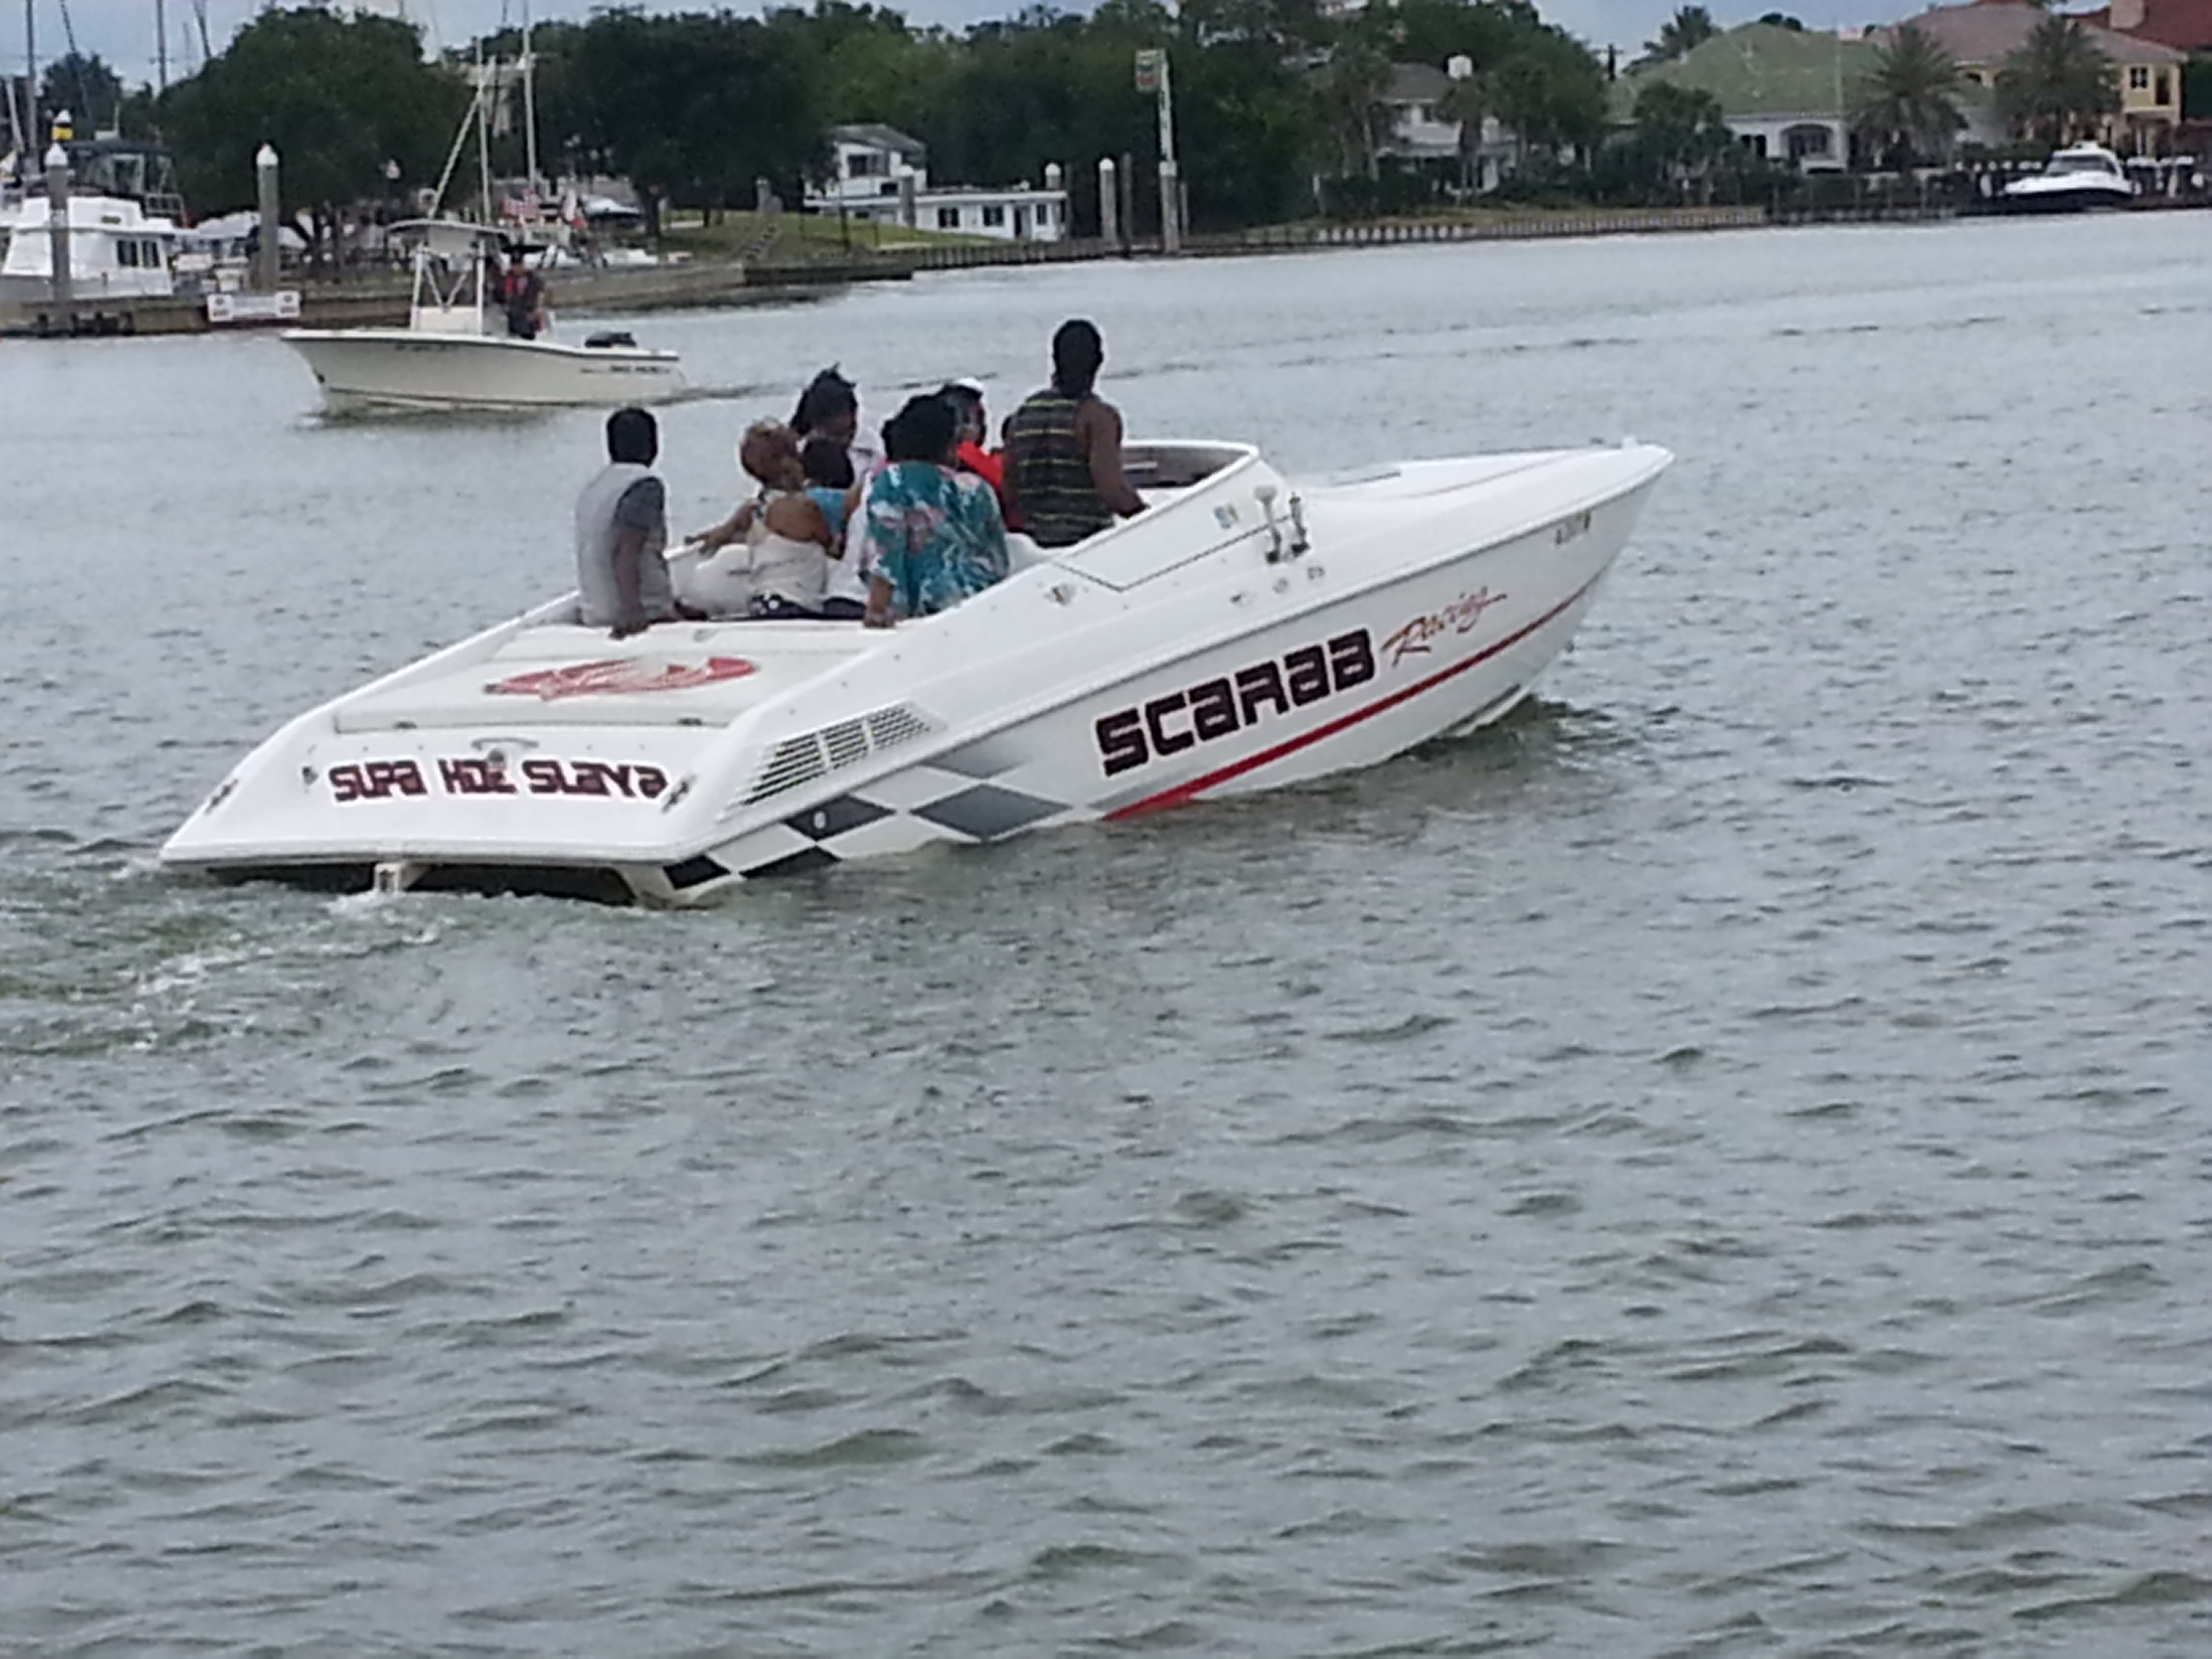 "What's the name of your boat?" "Supa Hoe Slaya"!  I saw this while out on the water today.